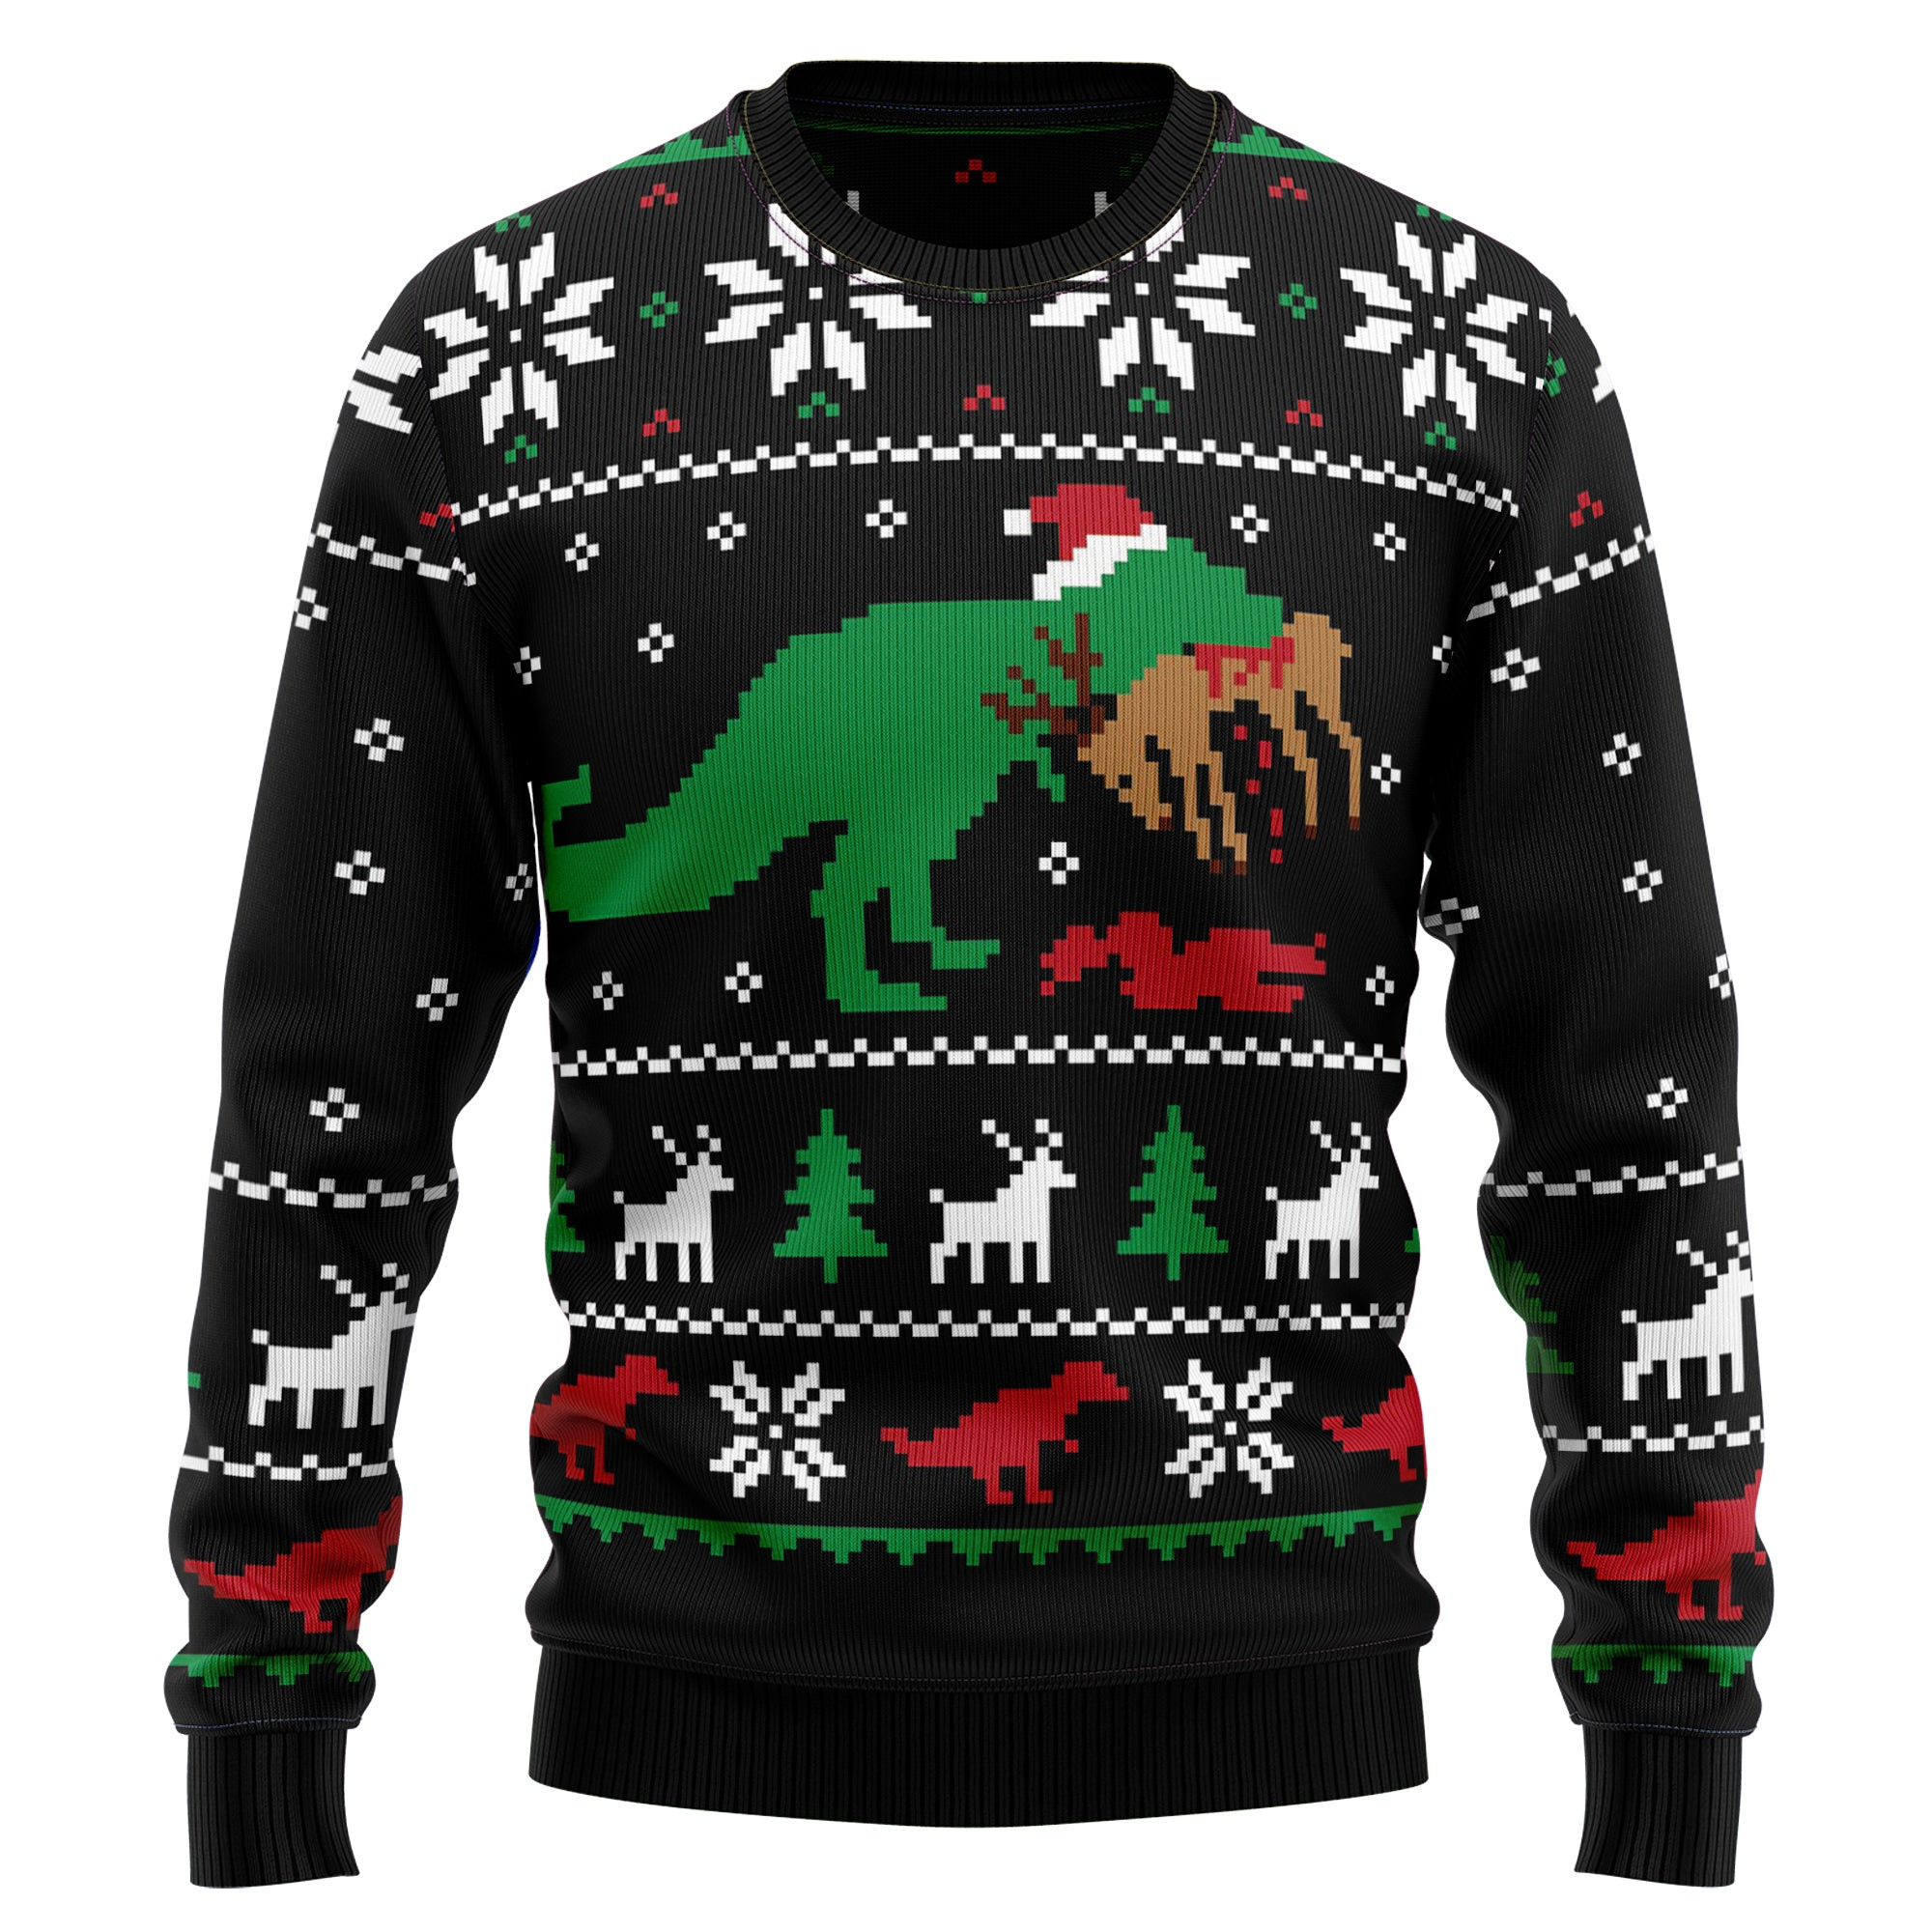 T-Rex Ugly Christmas Sweater